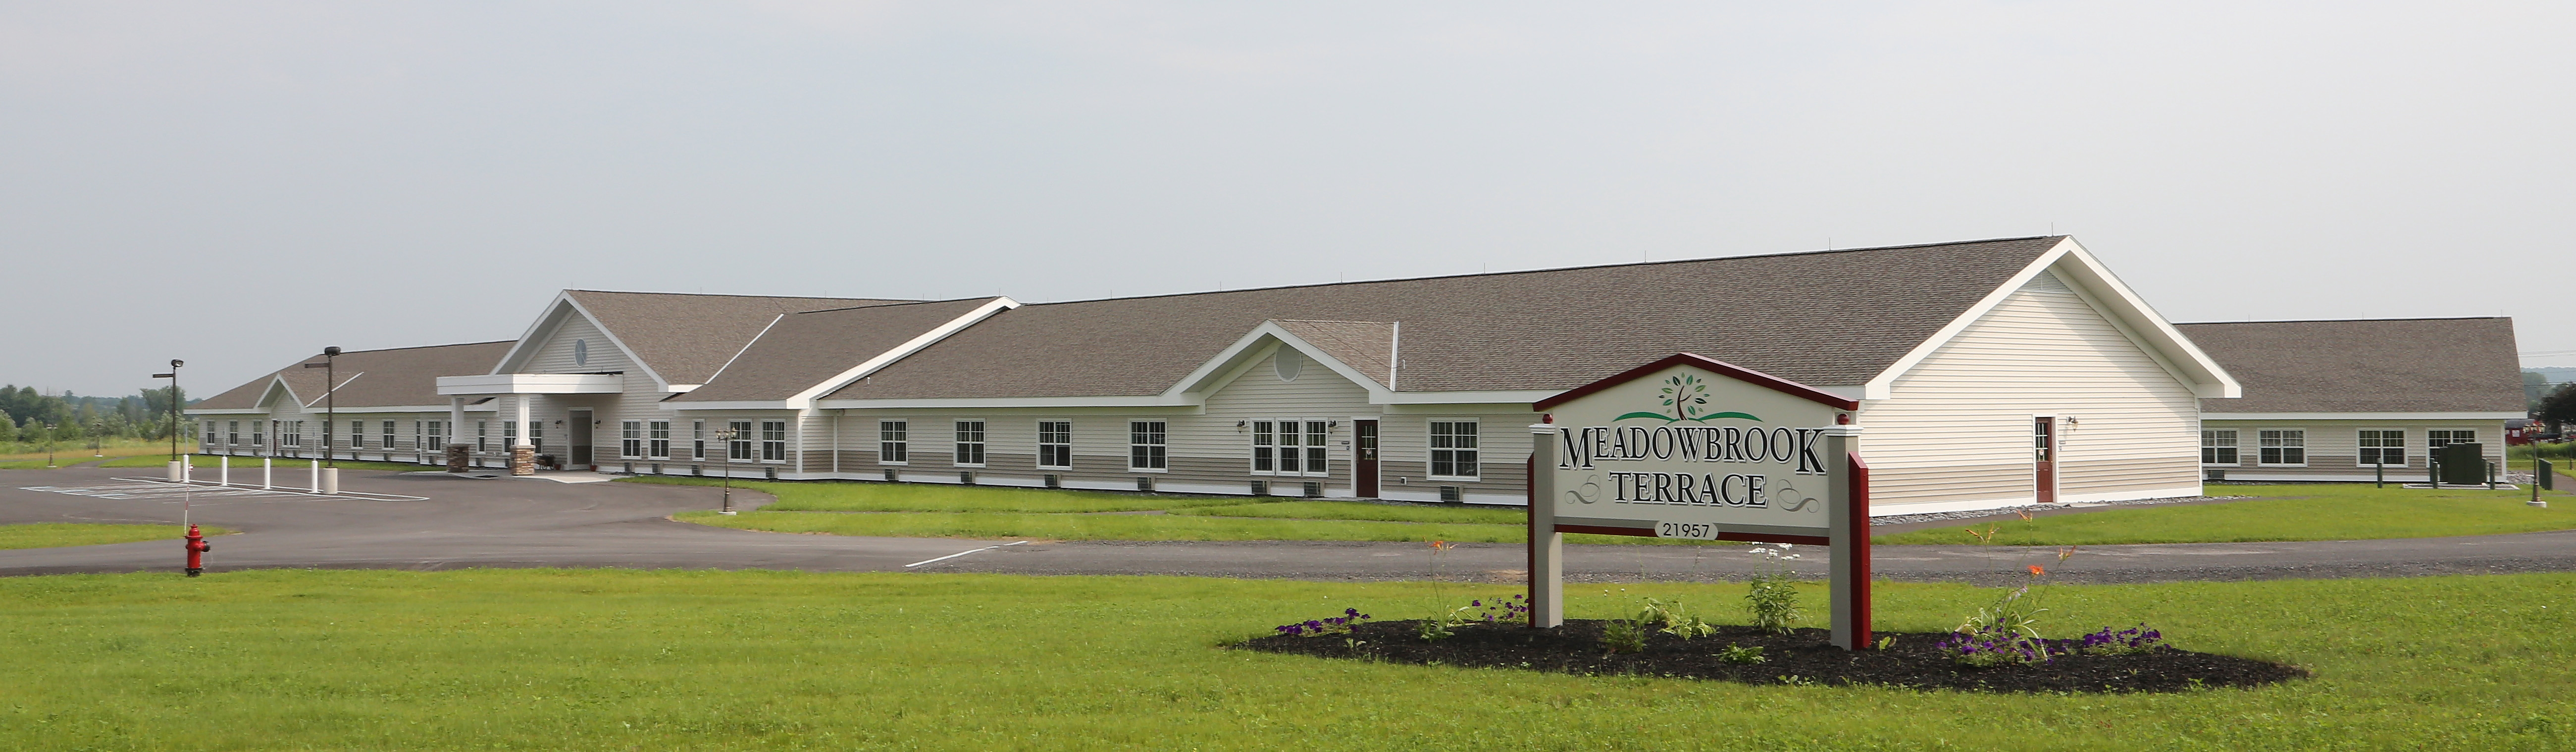 Outside View of Meadowbrook Terrace Assisted Living Facility